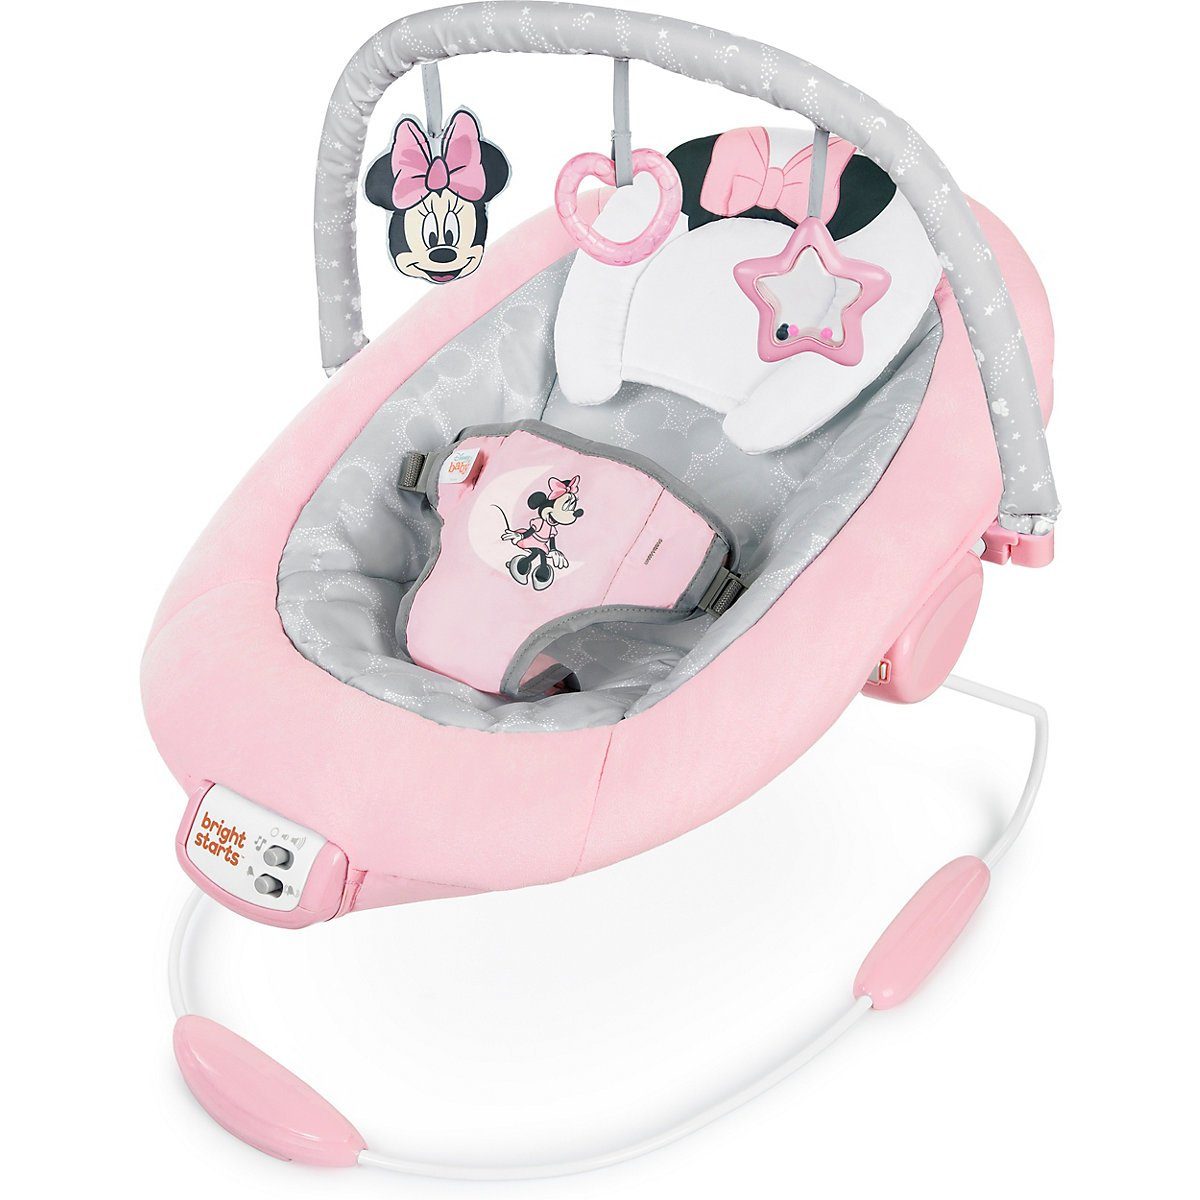 Kinder Babywippen Kids II Babywippe Wippe - Minnie Maus Blushing Bows